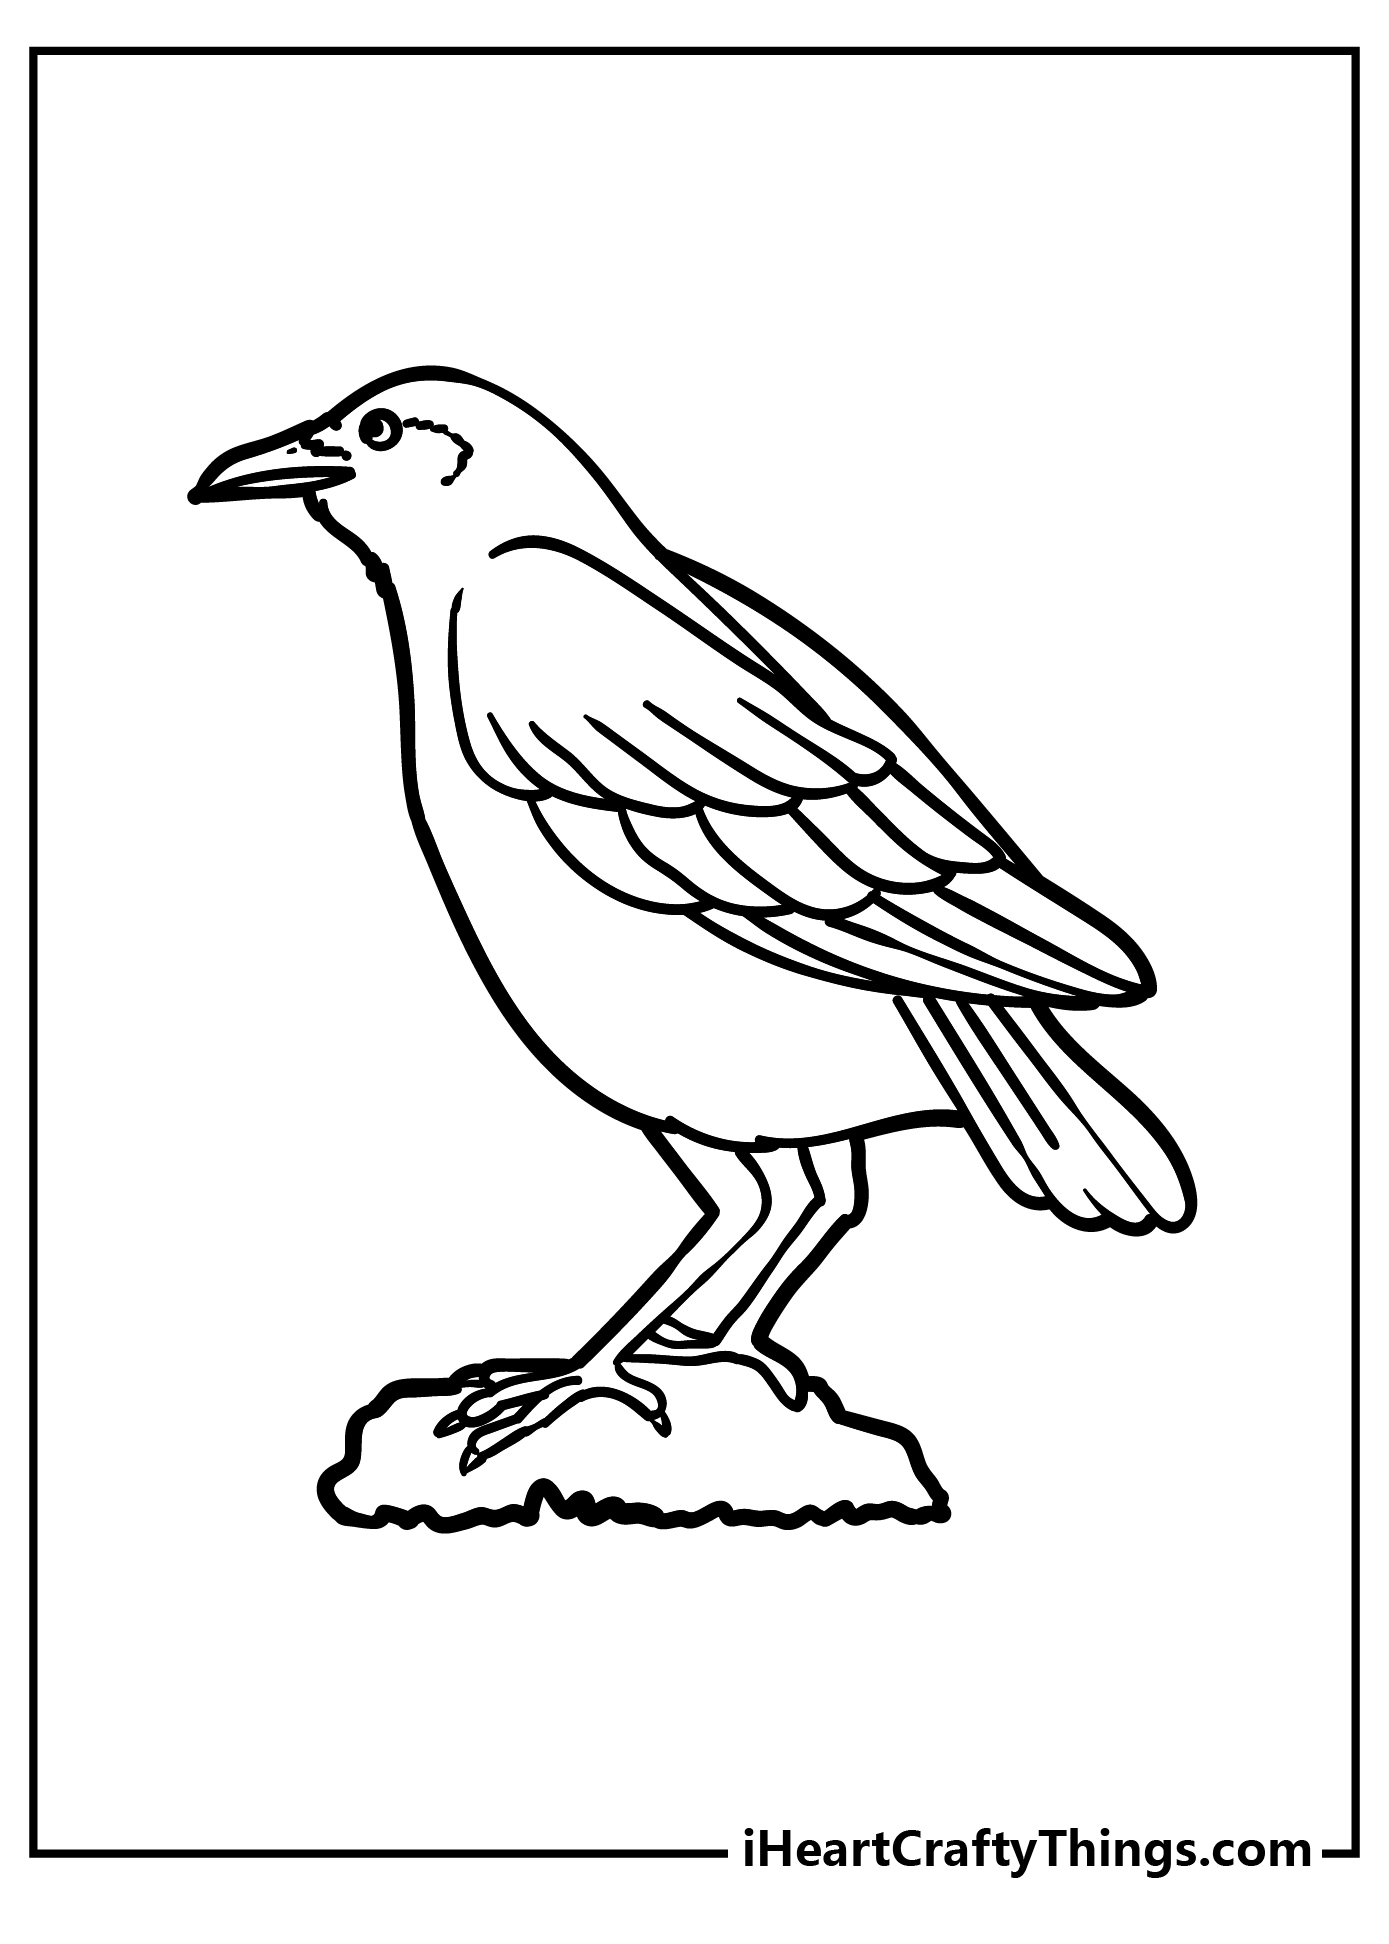 Raven Coloring Book for adults free download